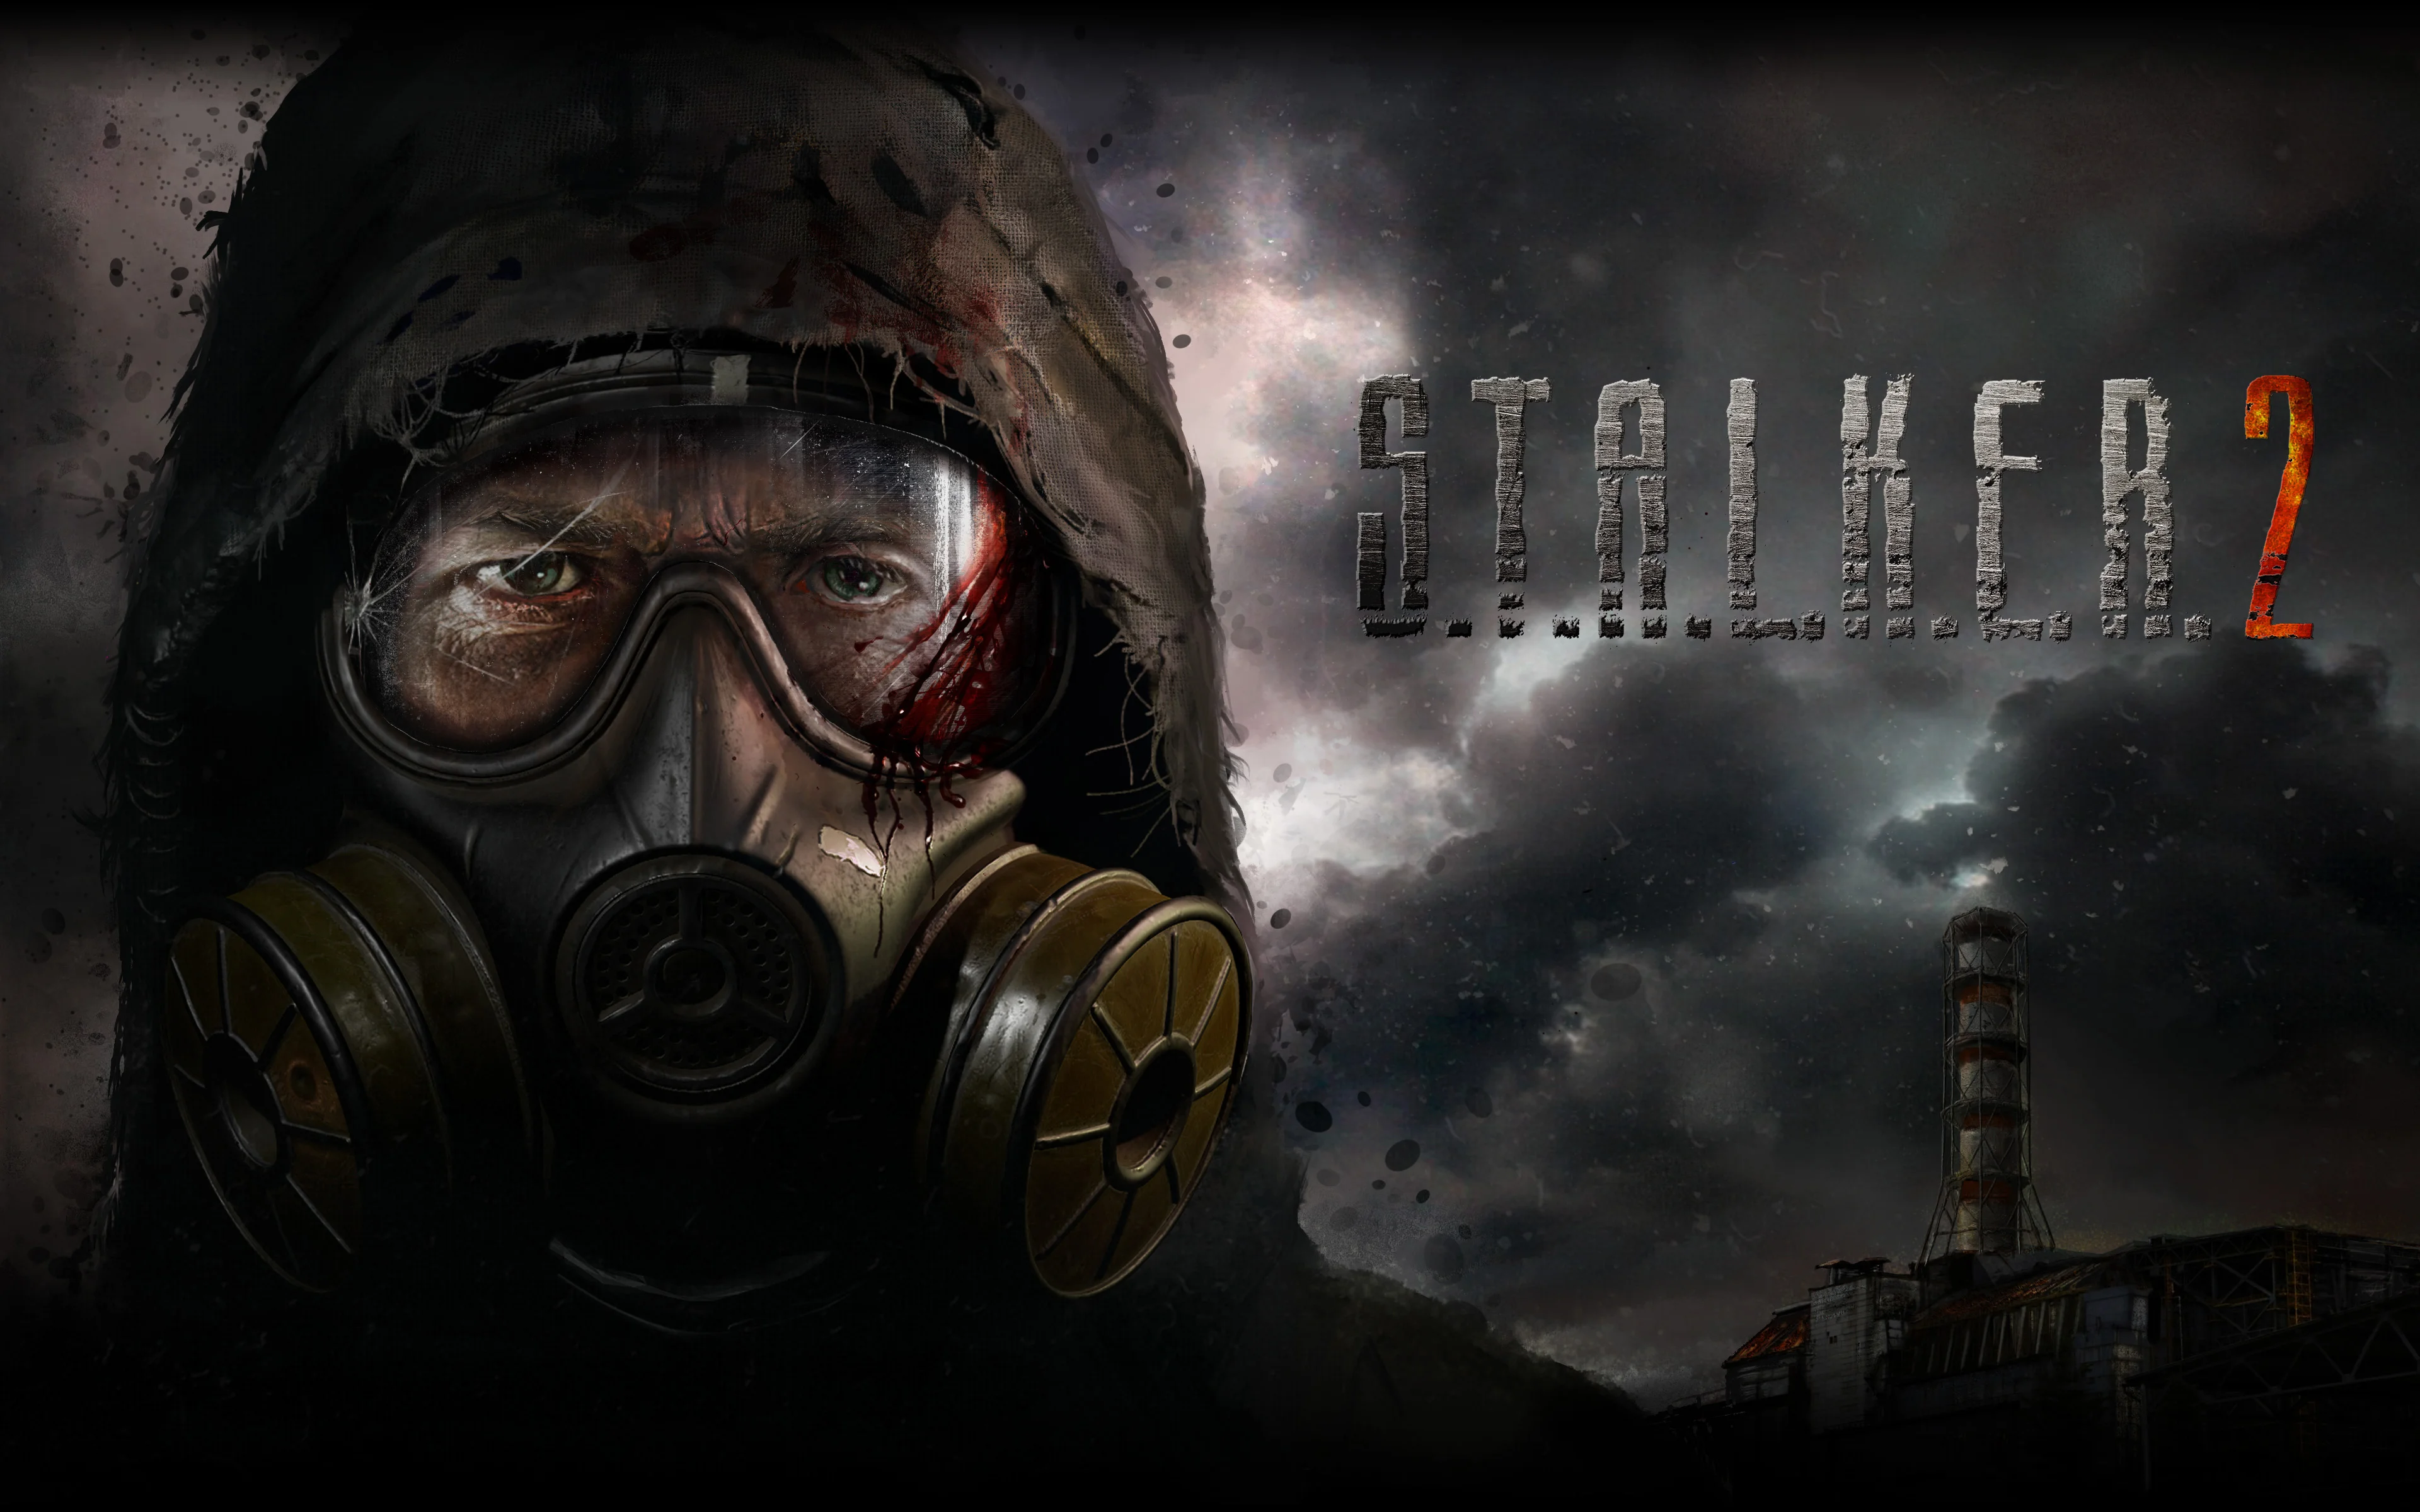 Released a poster for S.T.A.L.K.E.R. 2